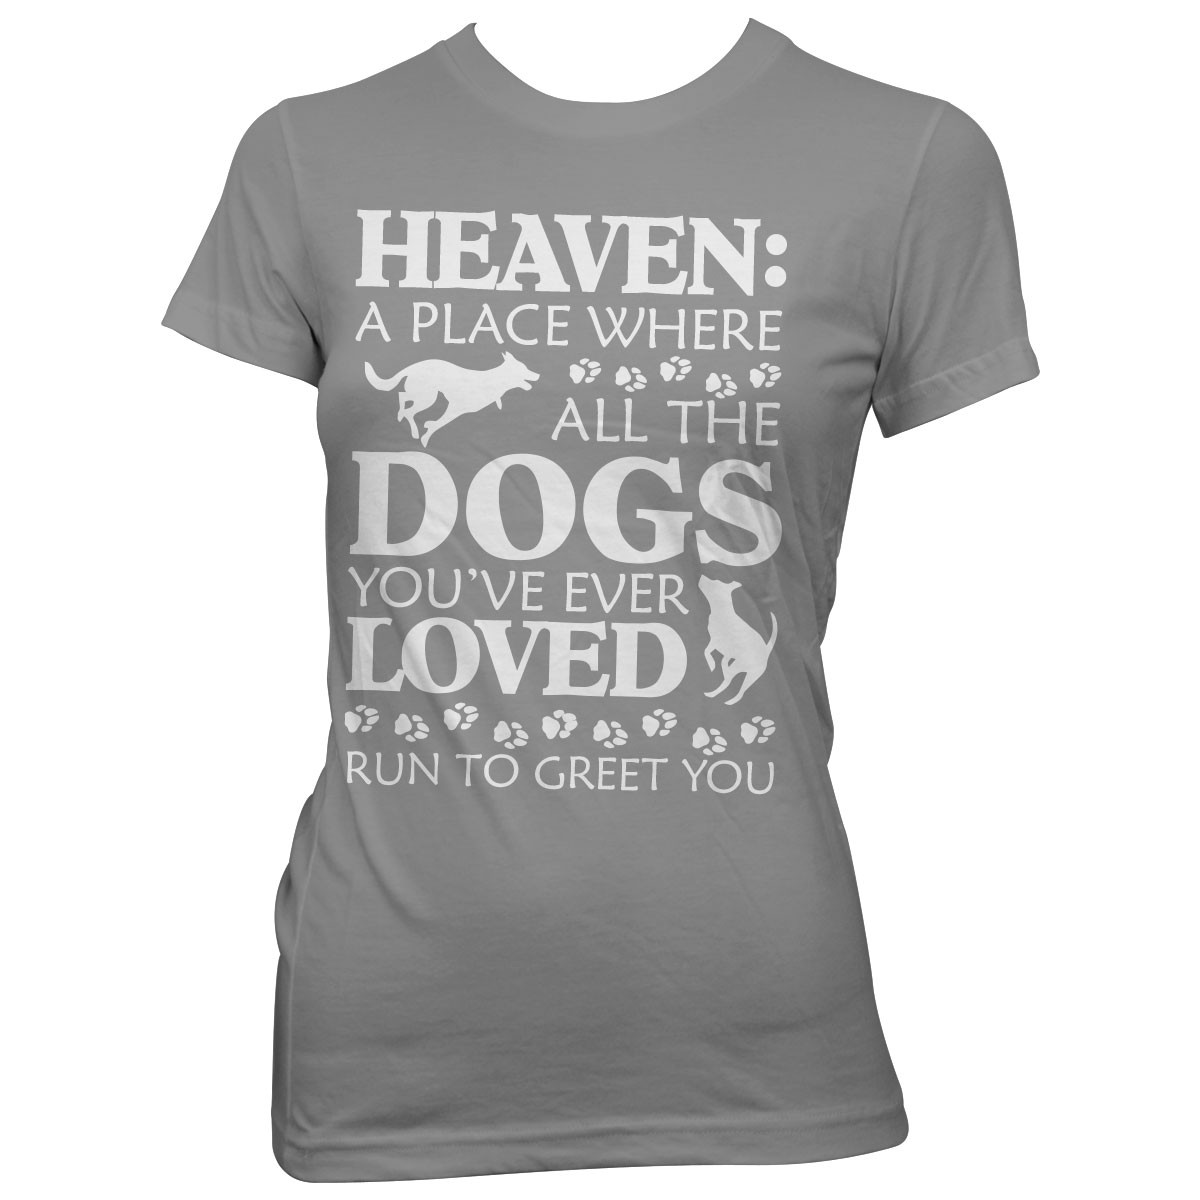 "Heaven: A Place Where Dogs Run To Greet You" T-Shirt